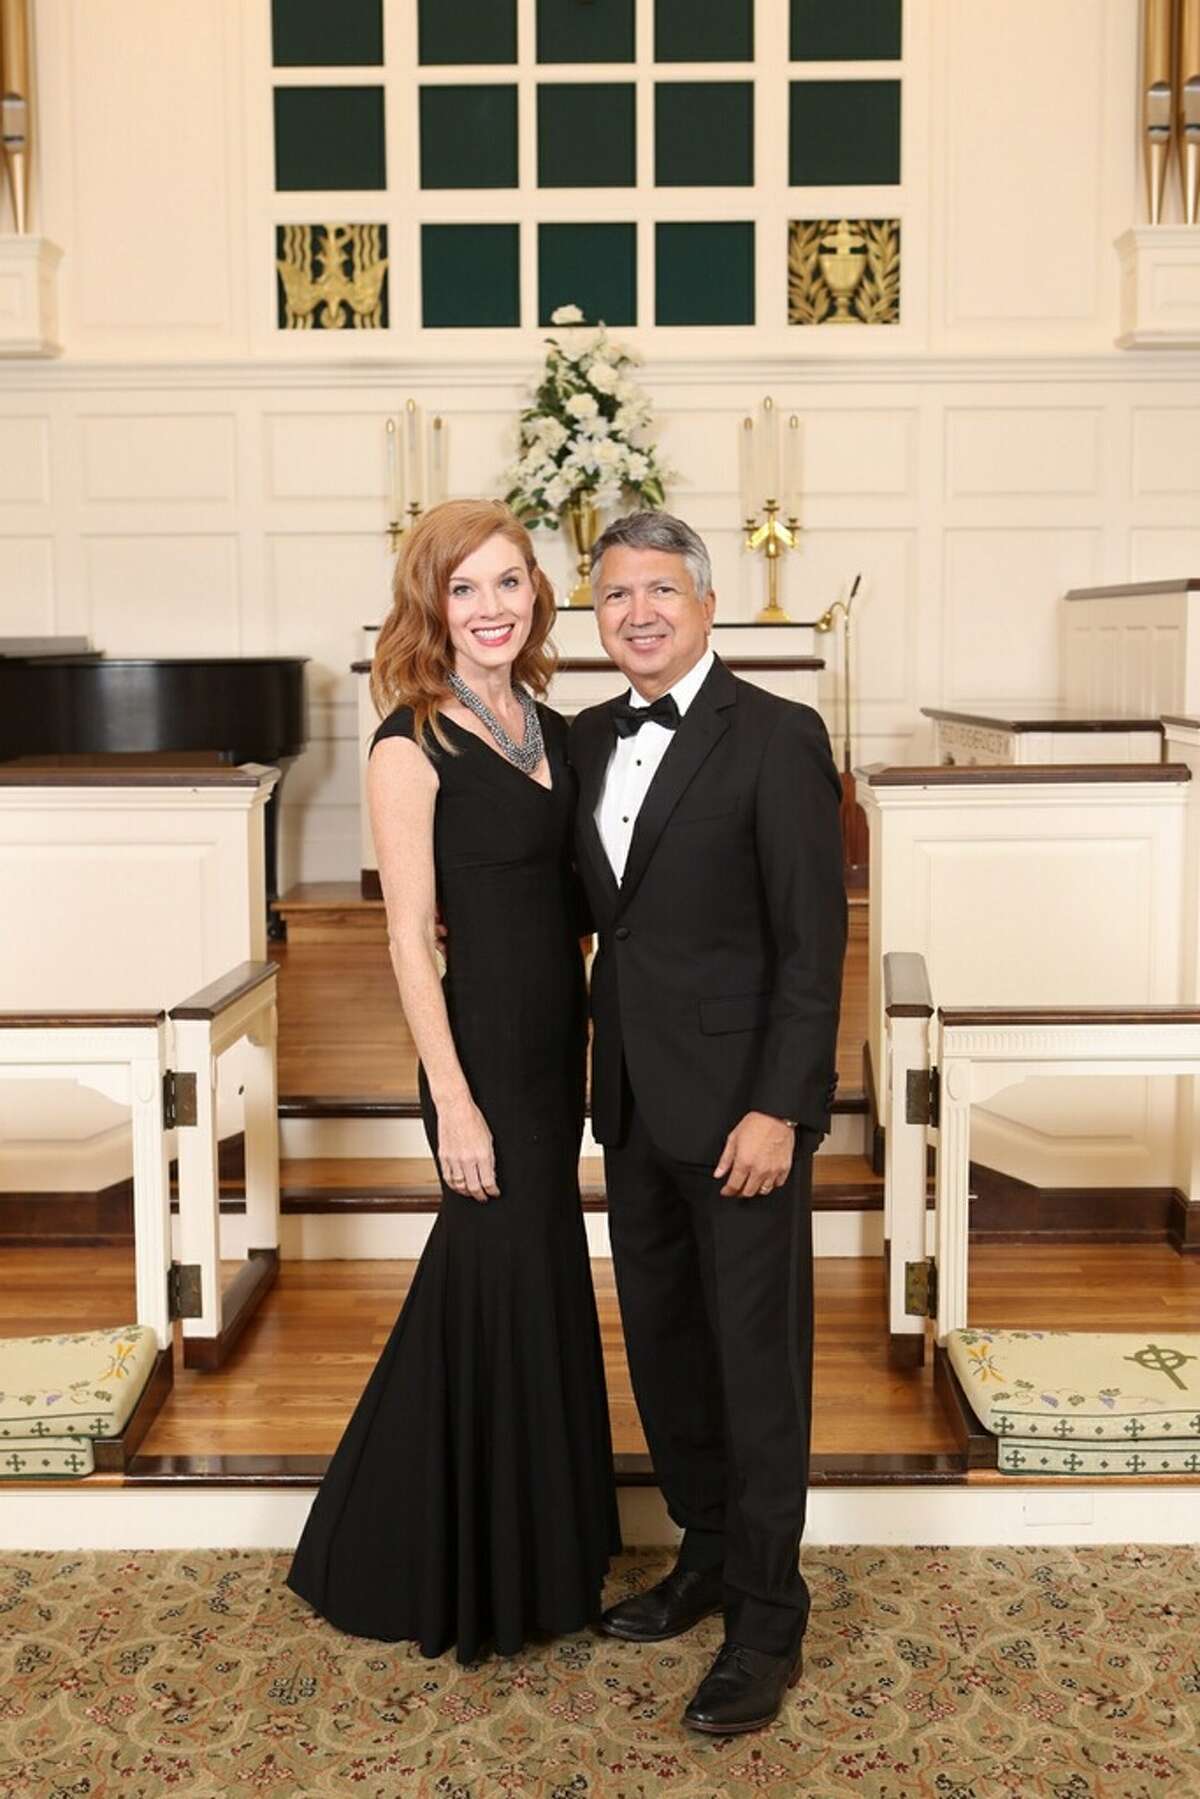 Beloved Local News Anchor Ron Trevino Ties The Knot